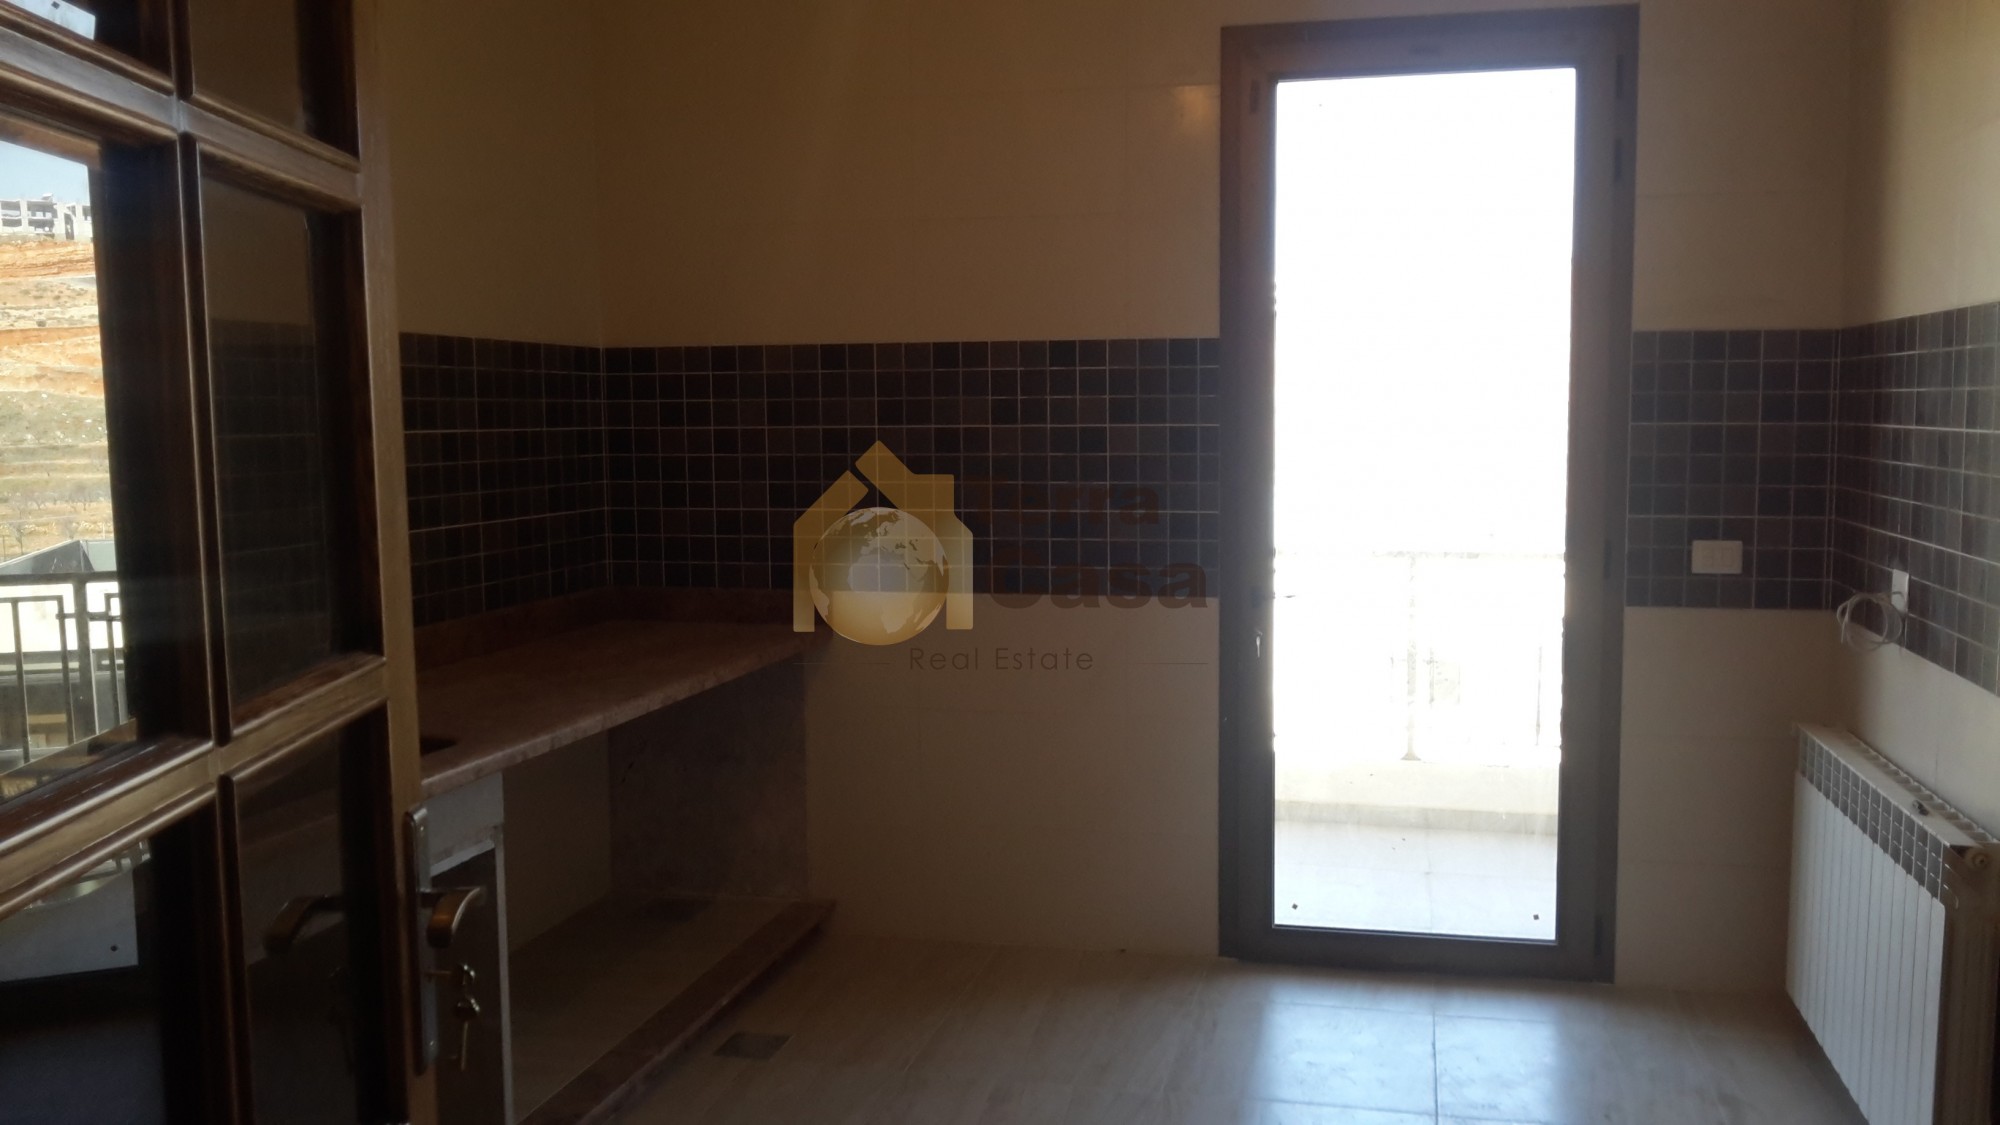 Apartment for sale in dhour Zahle brand new luxurious finishing with panoramic view .